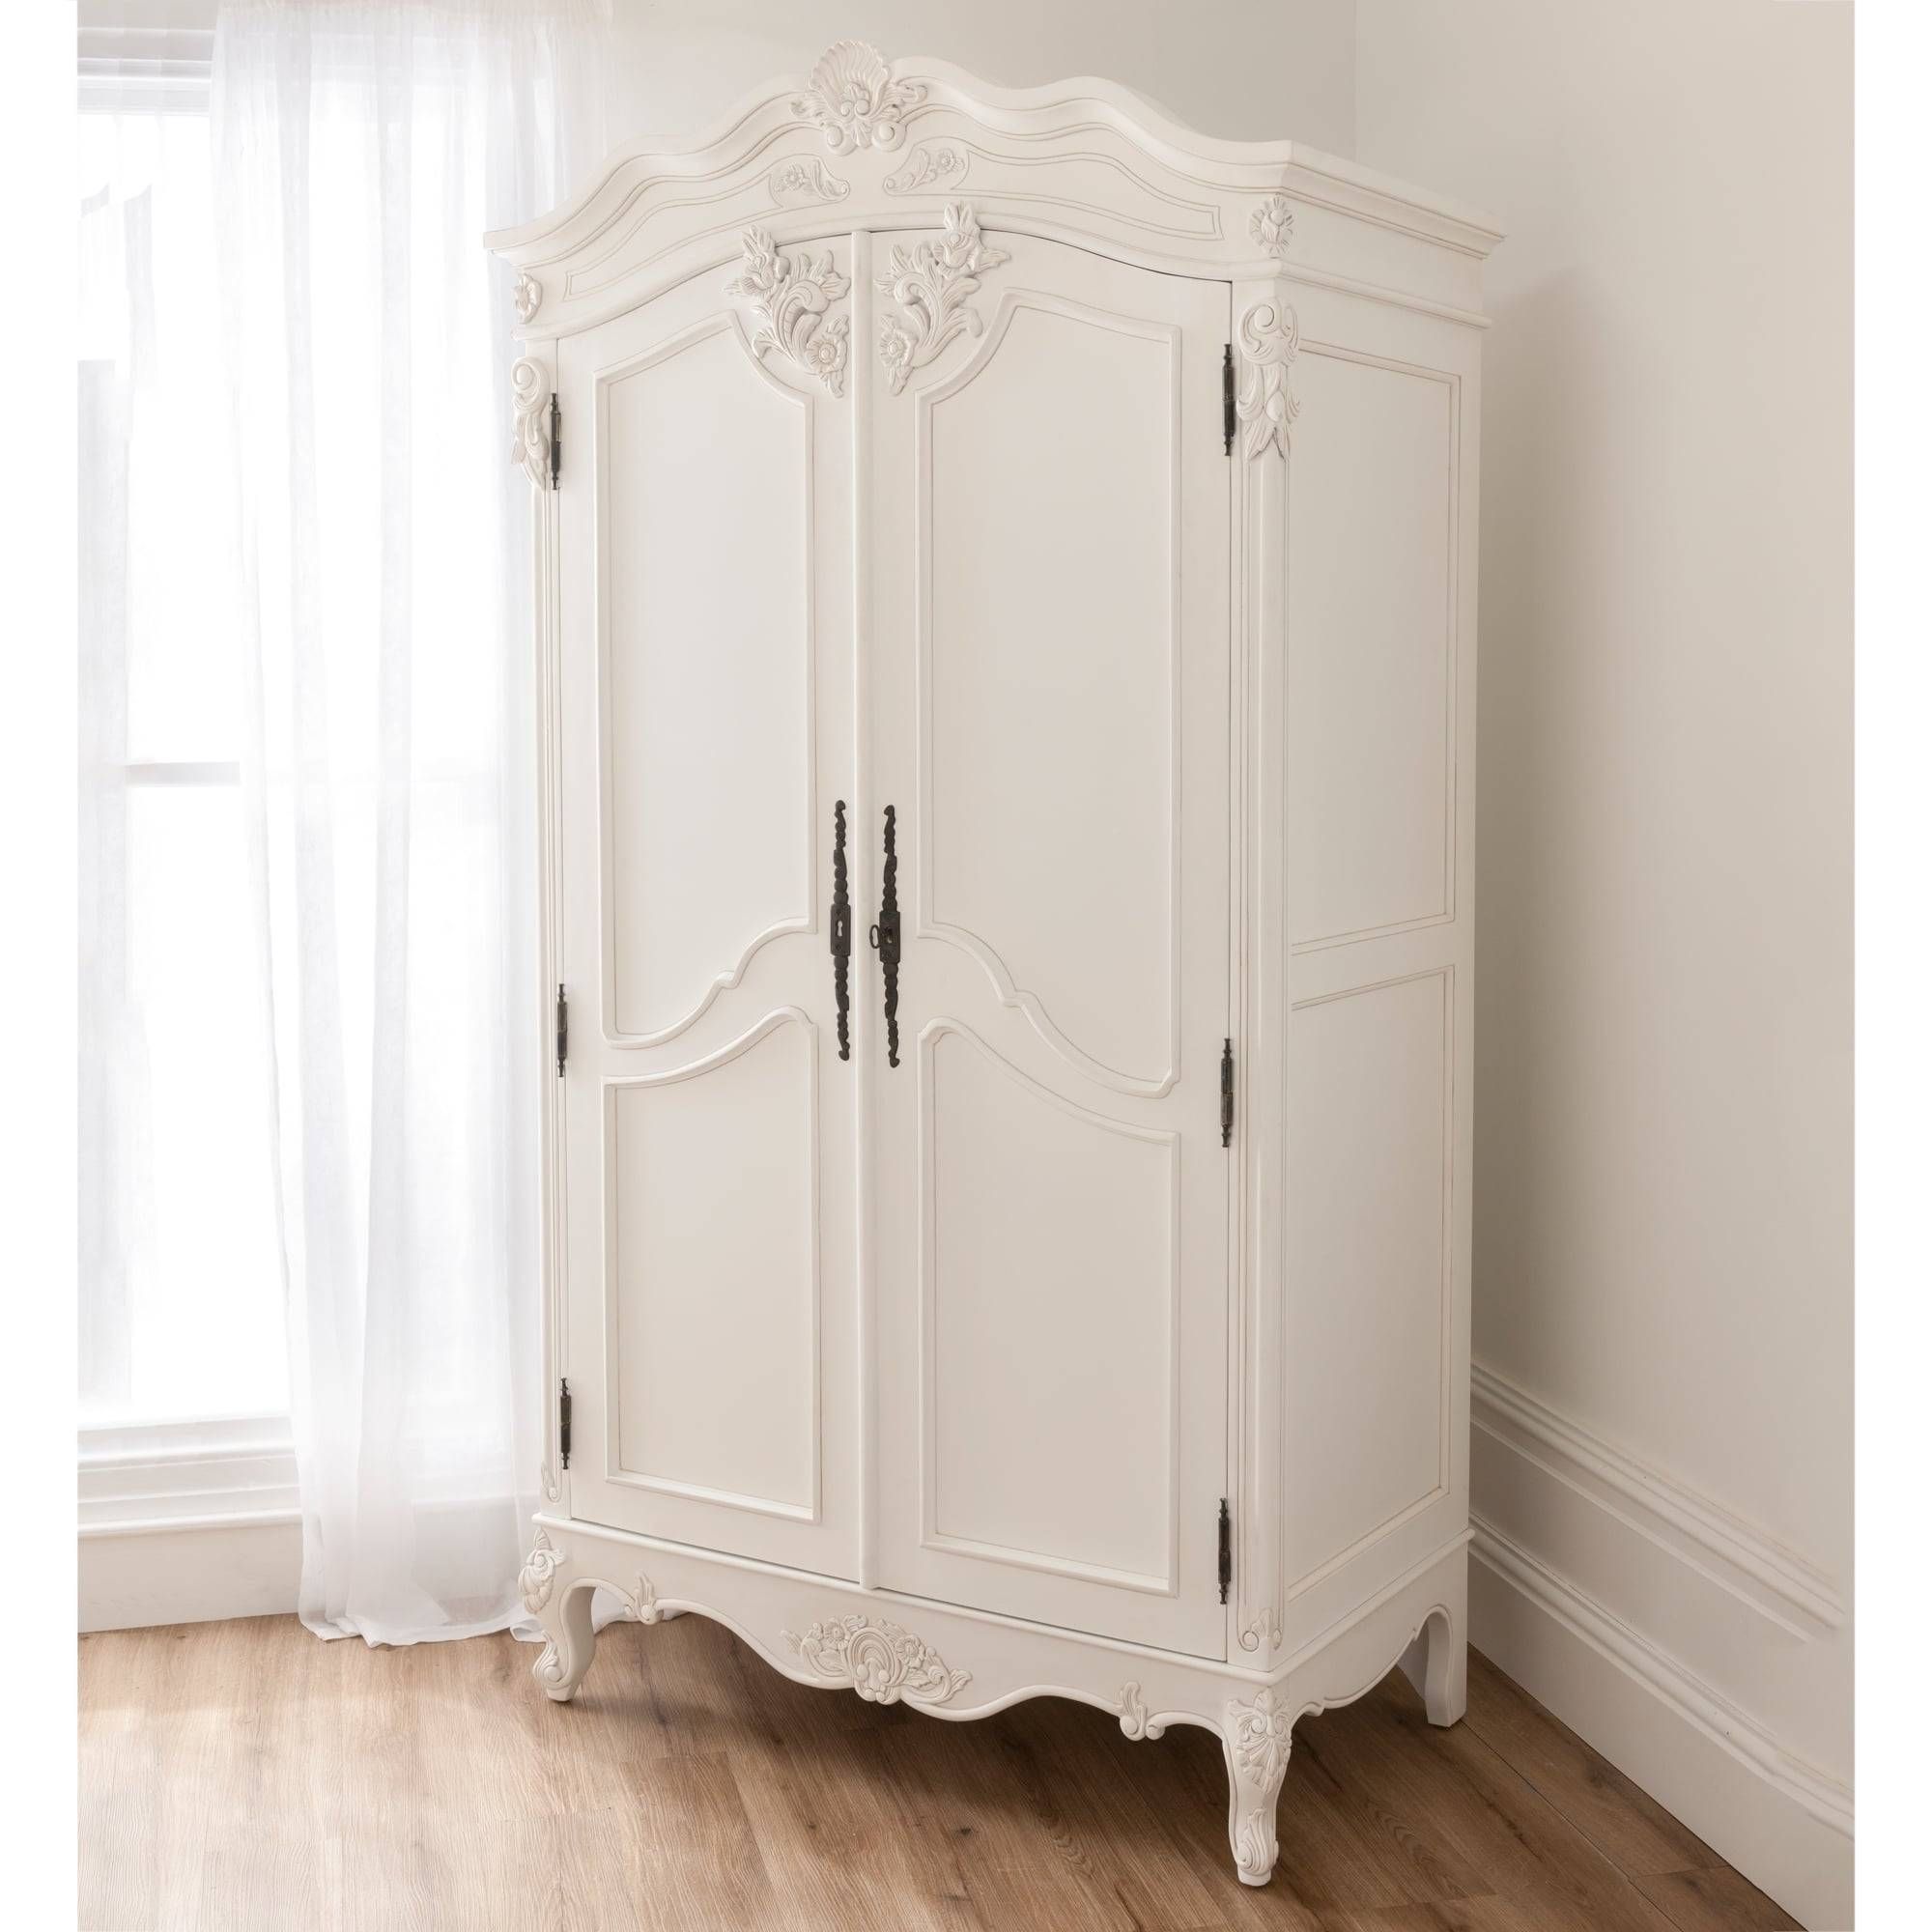 Rattan Antique French Style Wardrobe | Shabby Chic Bedroom Intended For French Style White Wardrobes (View 2 of 15)